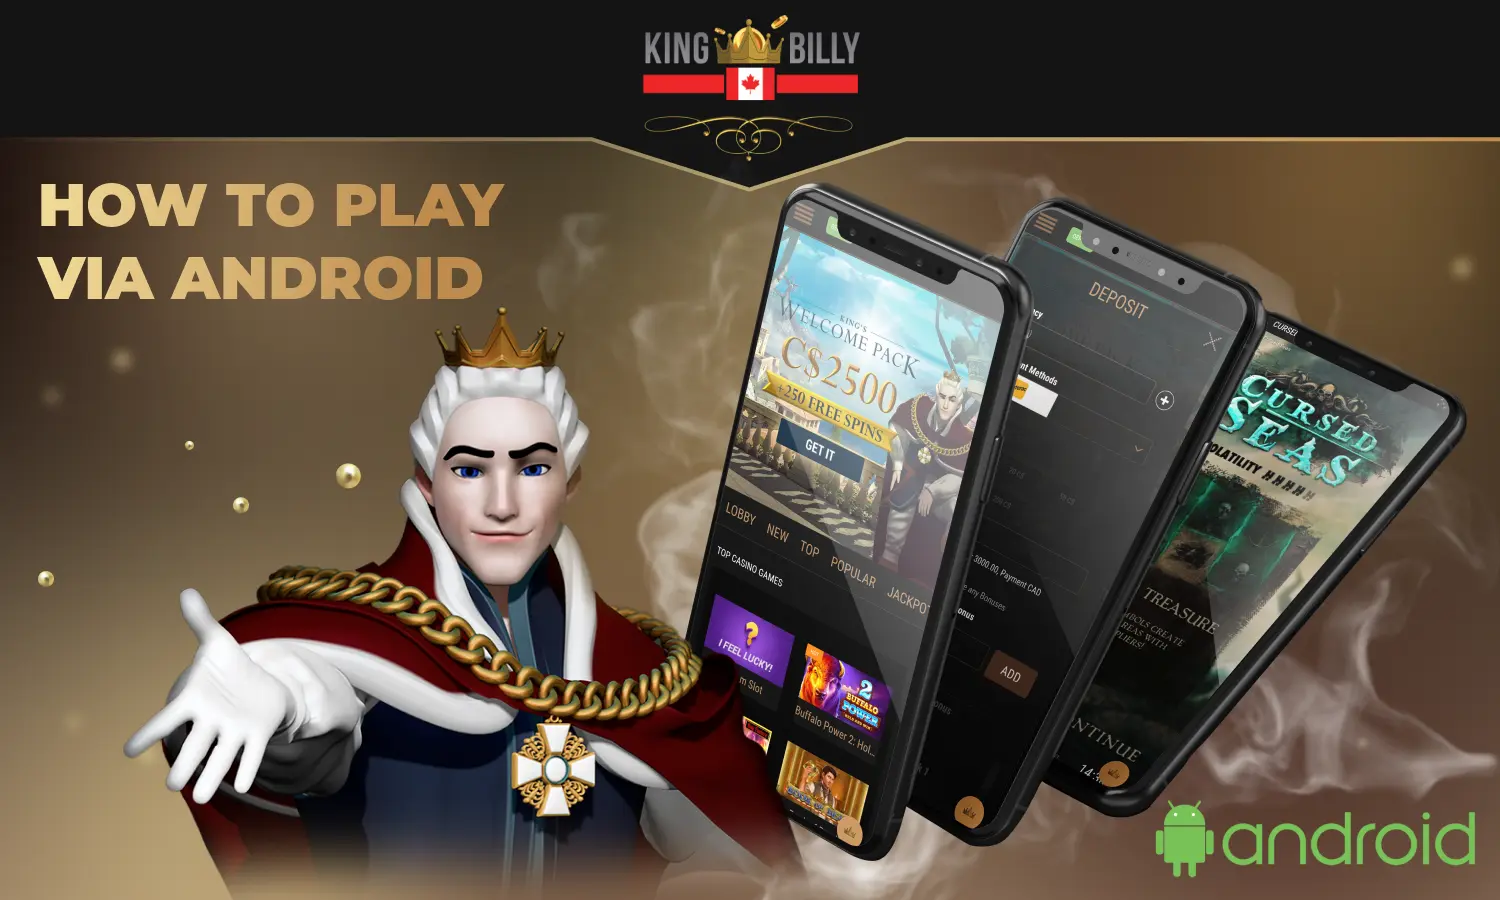 Canadian users Can Play King Billy Mobile Casino from any Android device